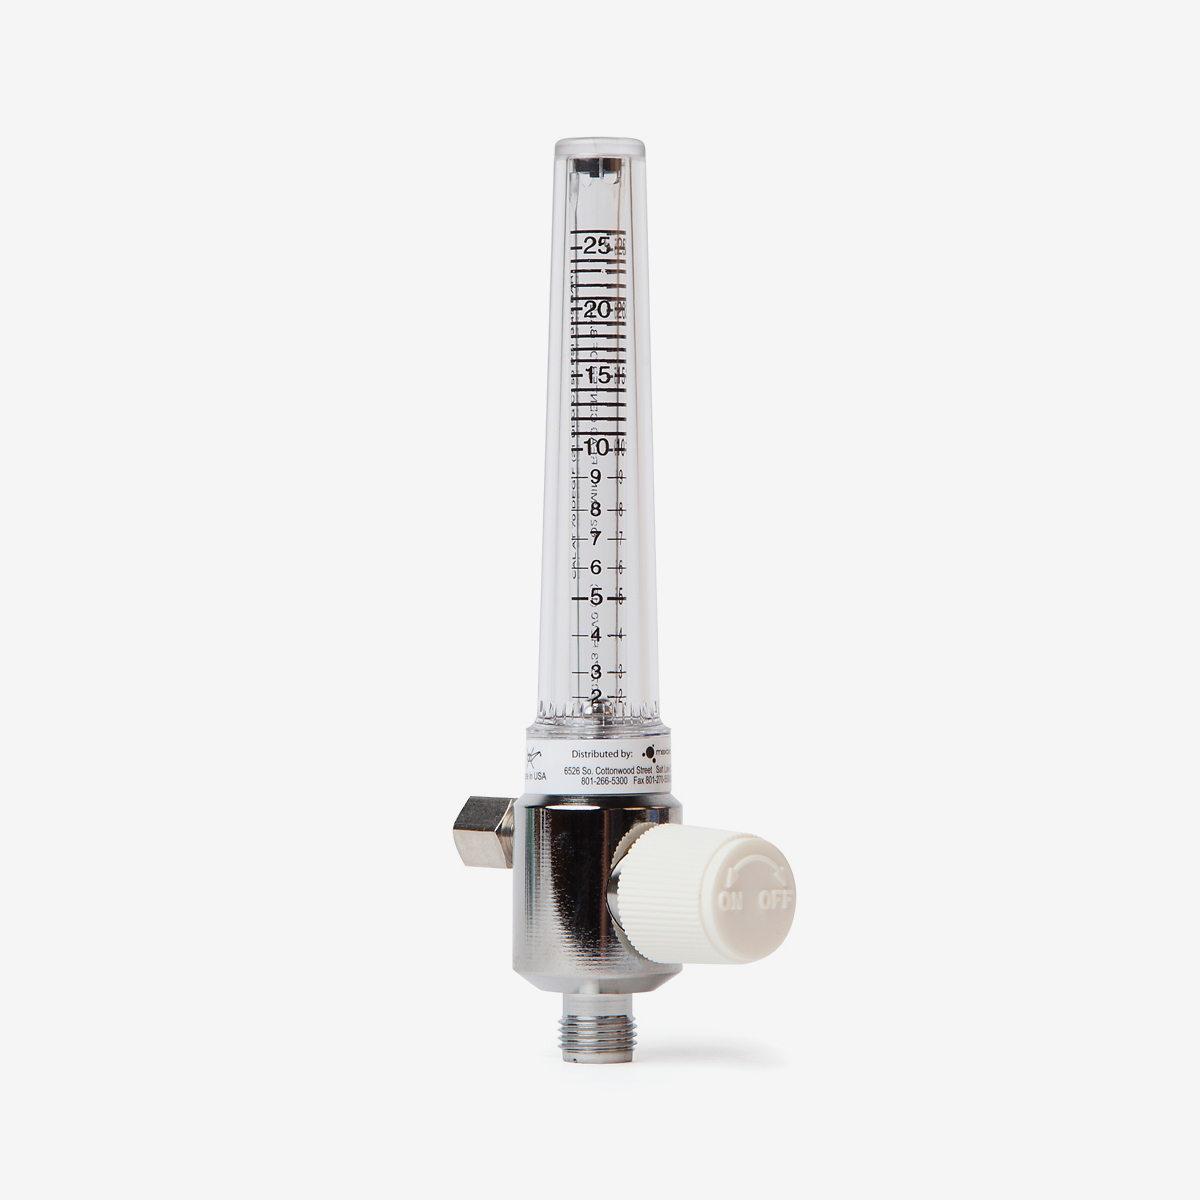 2-26 liters per minute flow meter with white knob on white background shown from an angle